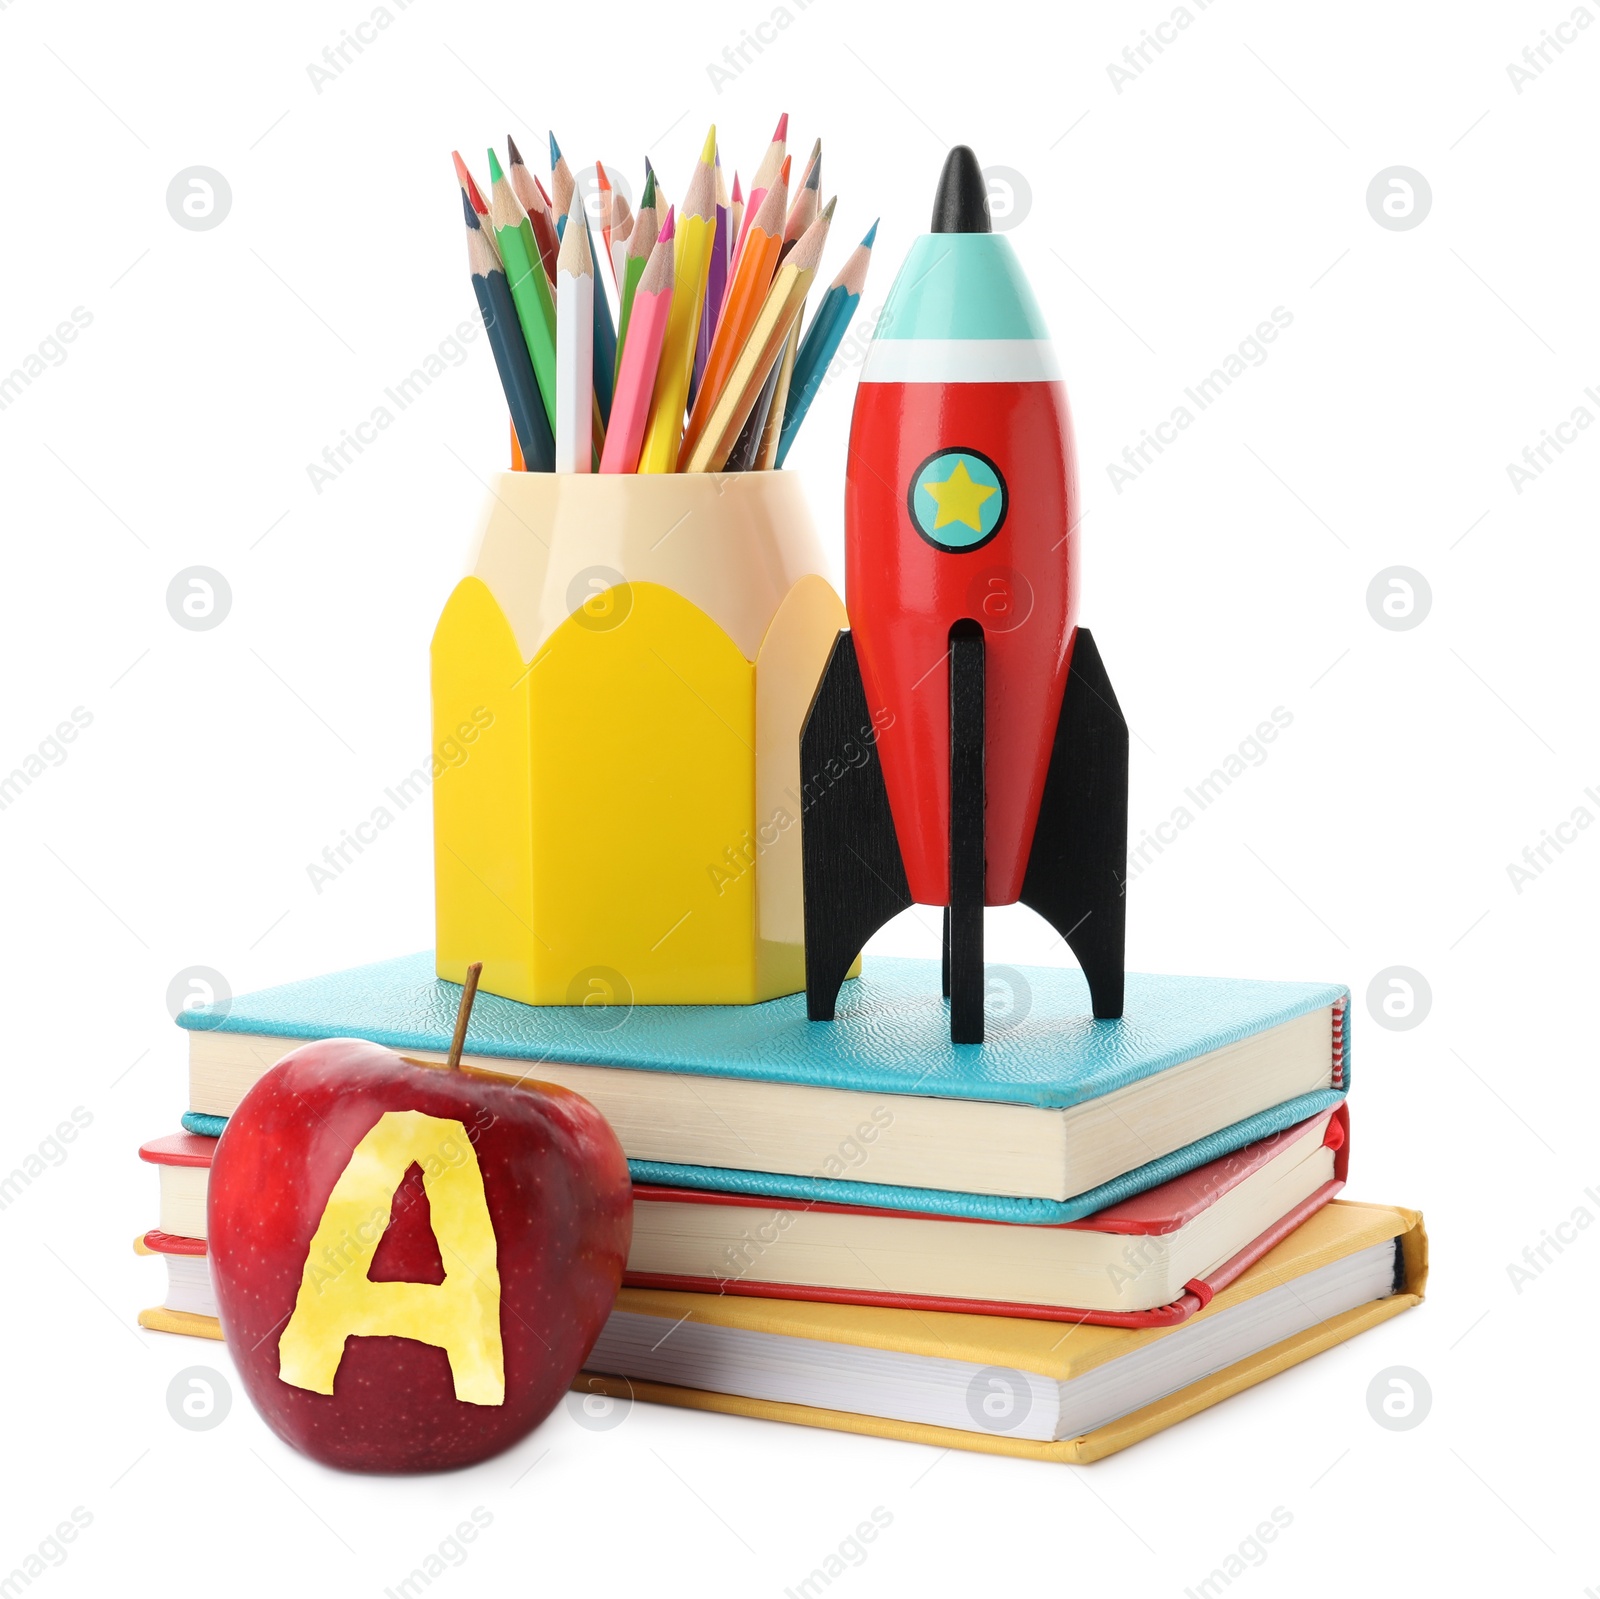 Image of Apple with carved letter A as grade. Bright toy rocket and school supplies on white background